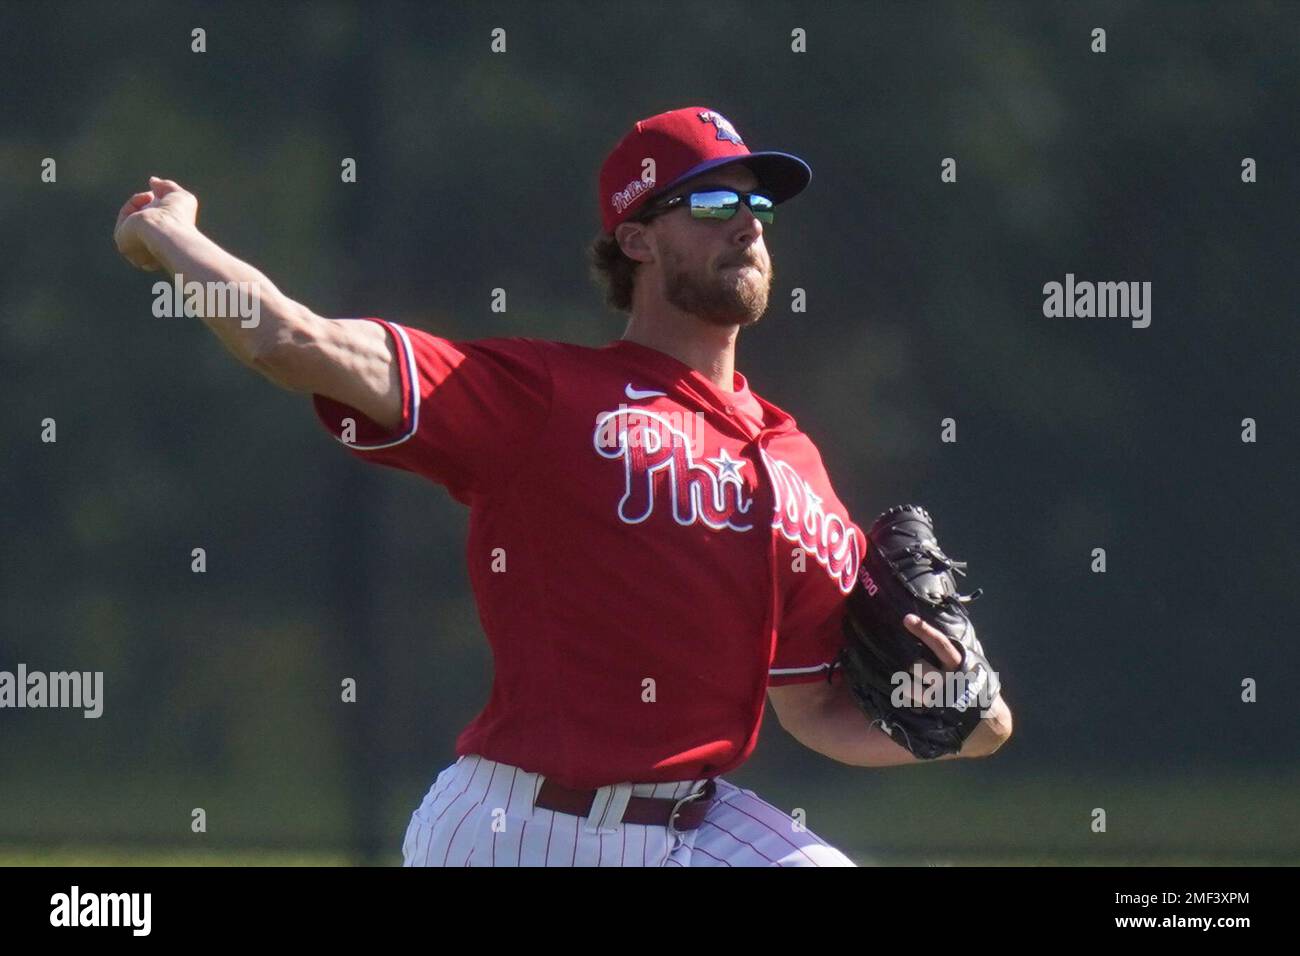 Inside the training routine that makes the Phillies' Aaron Nola baseball's  most durable pitcher